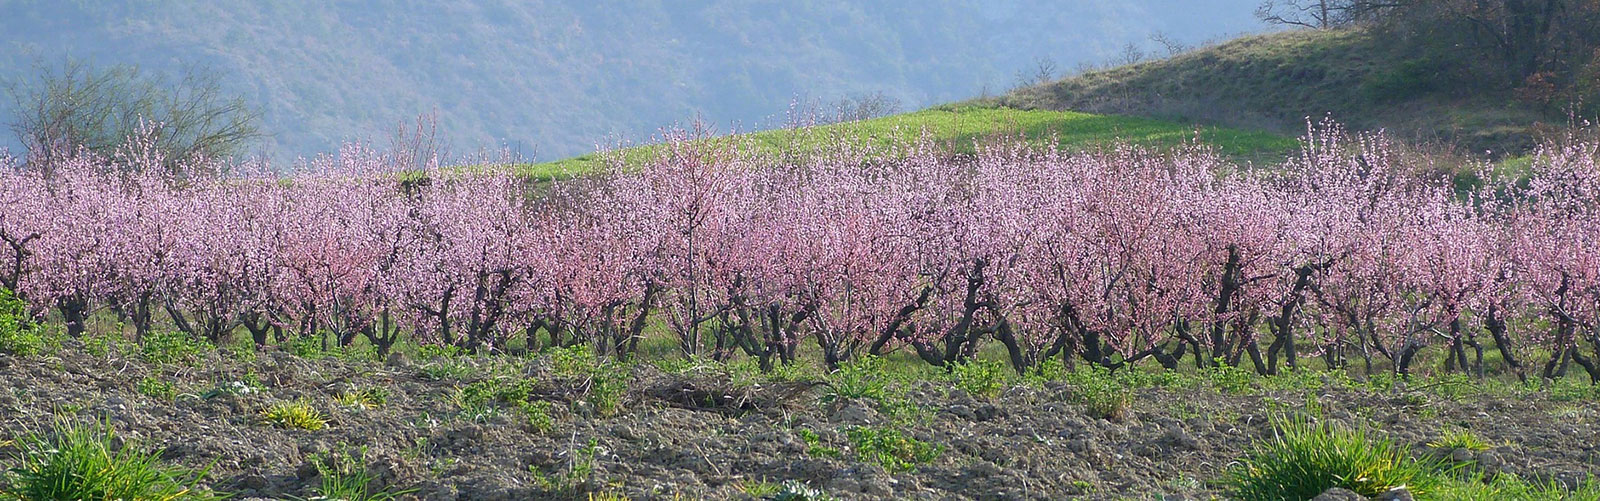 Citrus trees on a hillside with pink flowers